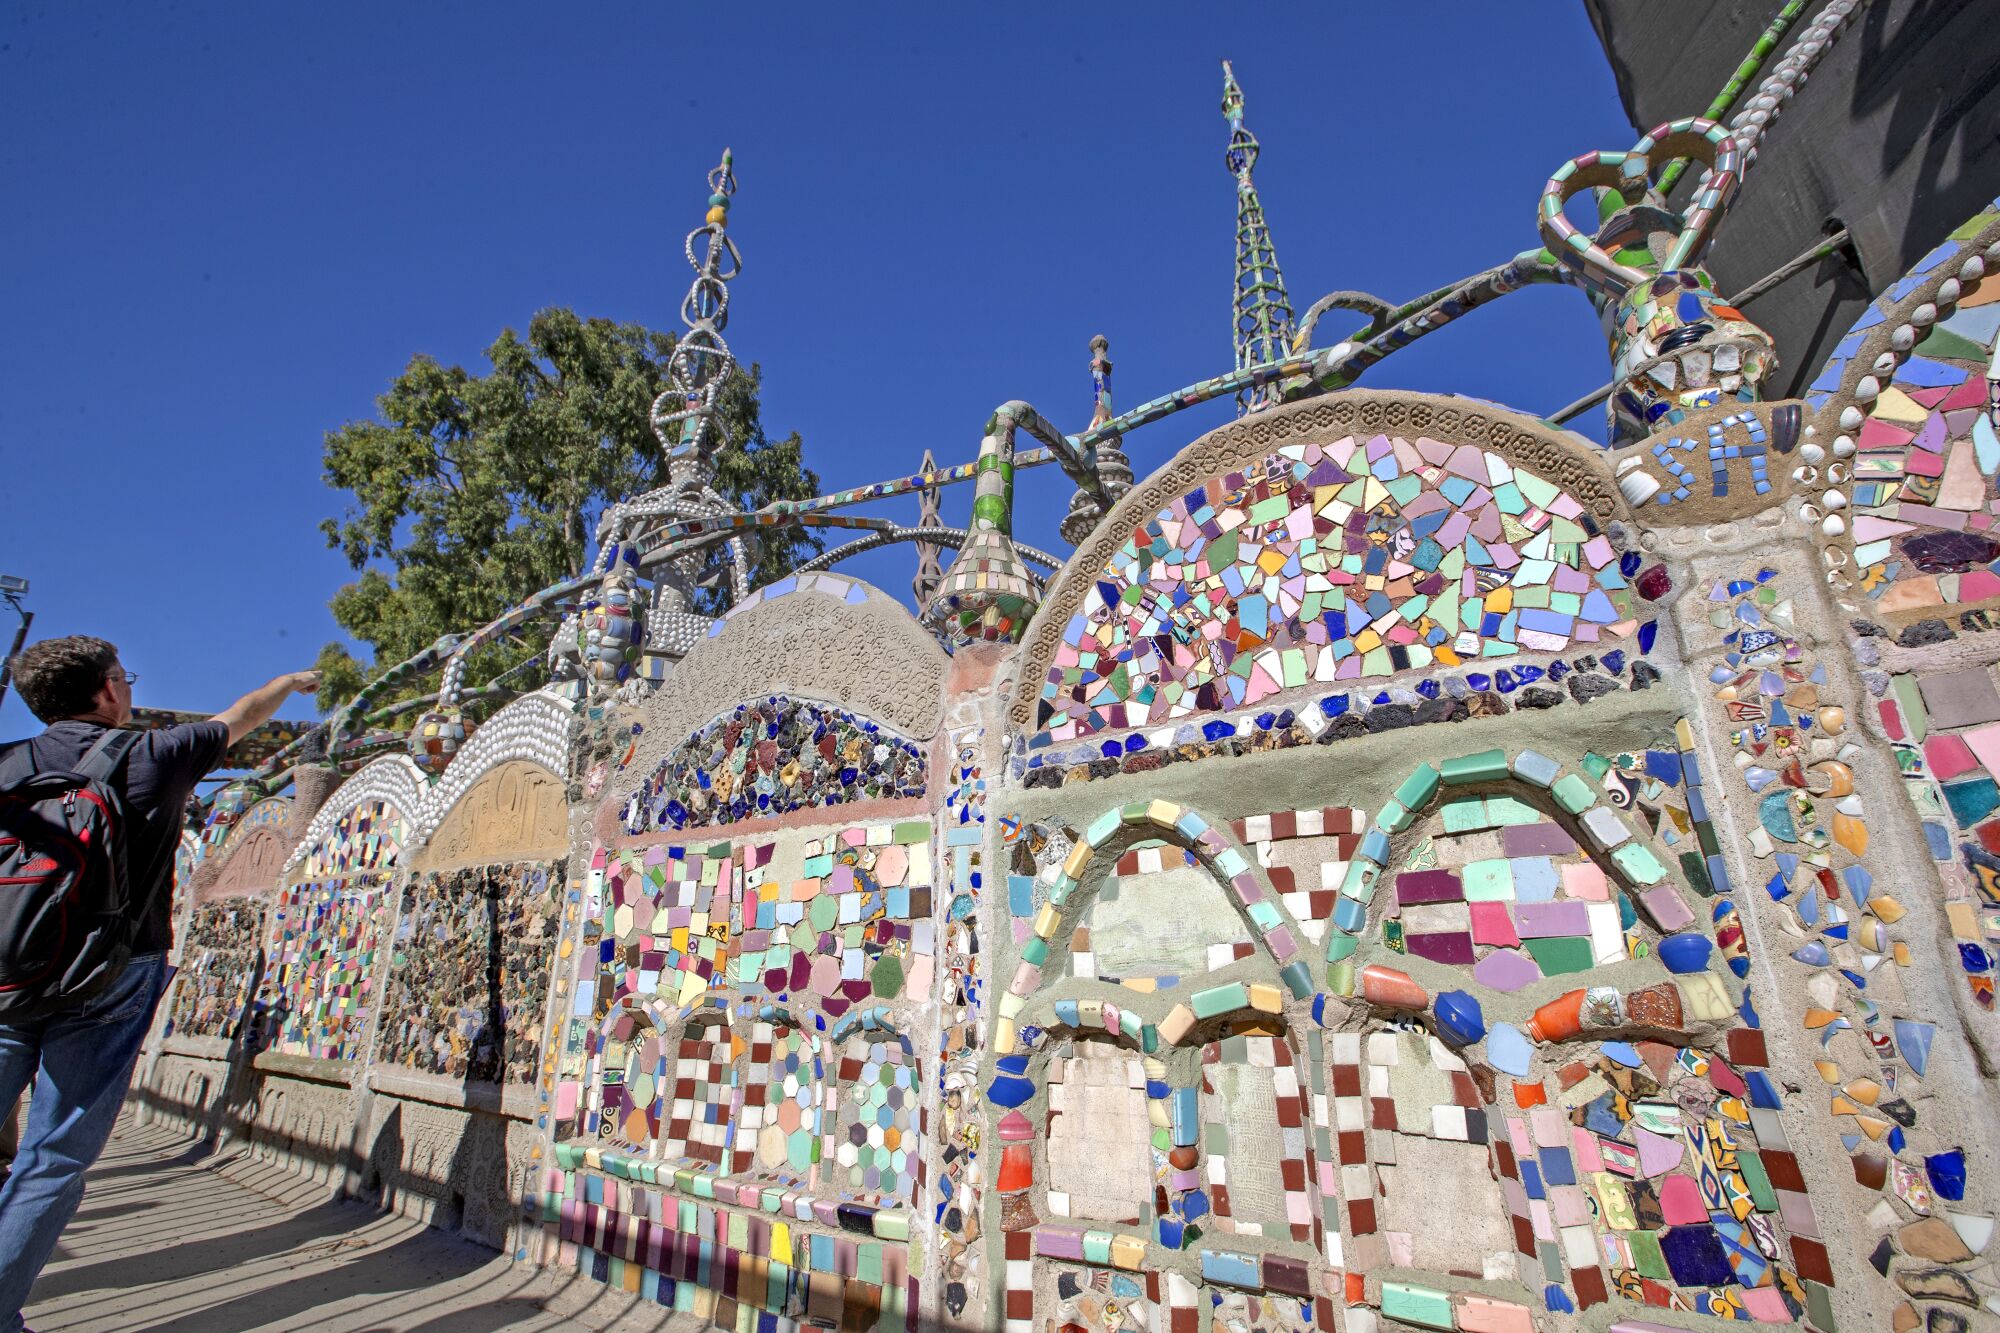 A concrete wall decorated in mosaics, in front of a giant metal tower